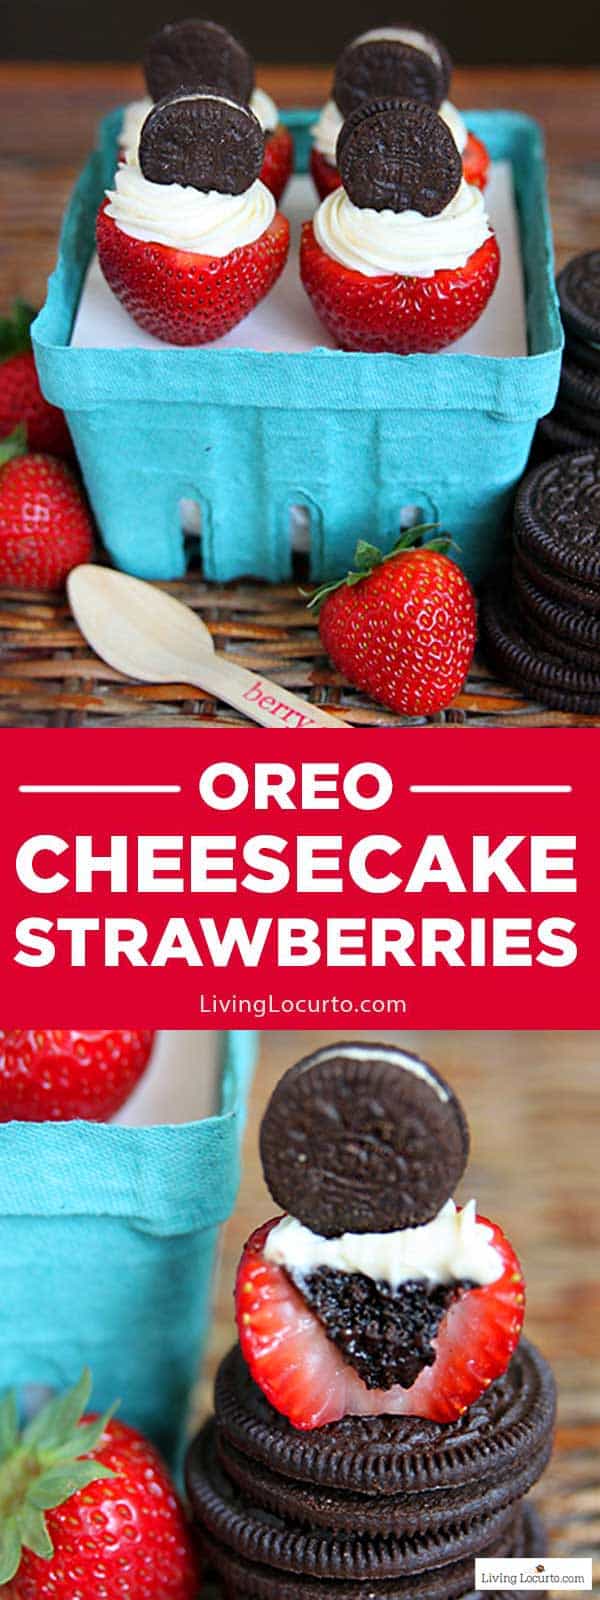 OREO Cheesecake Stuffed Strawberries are the best of strawberries and OREO cheesecake in one fabulous bite! Easy no-bake chocolate strawberry dessert is a perfect bite sized recipe for any party. LivingLocurto.com